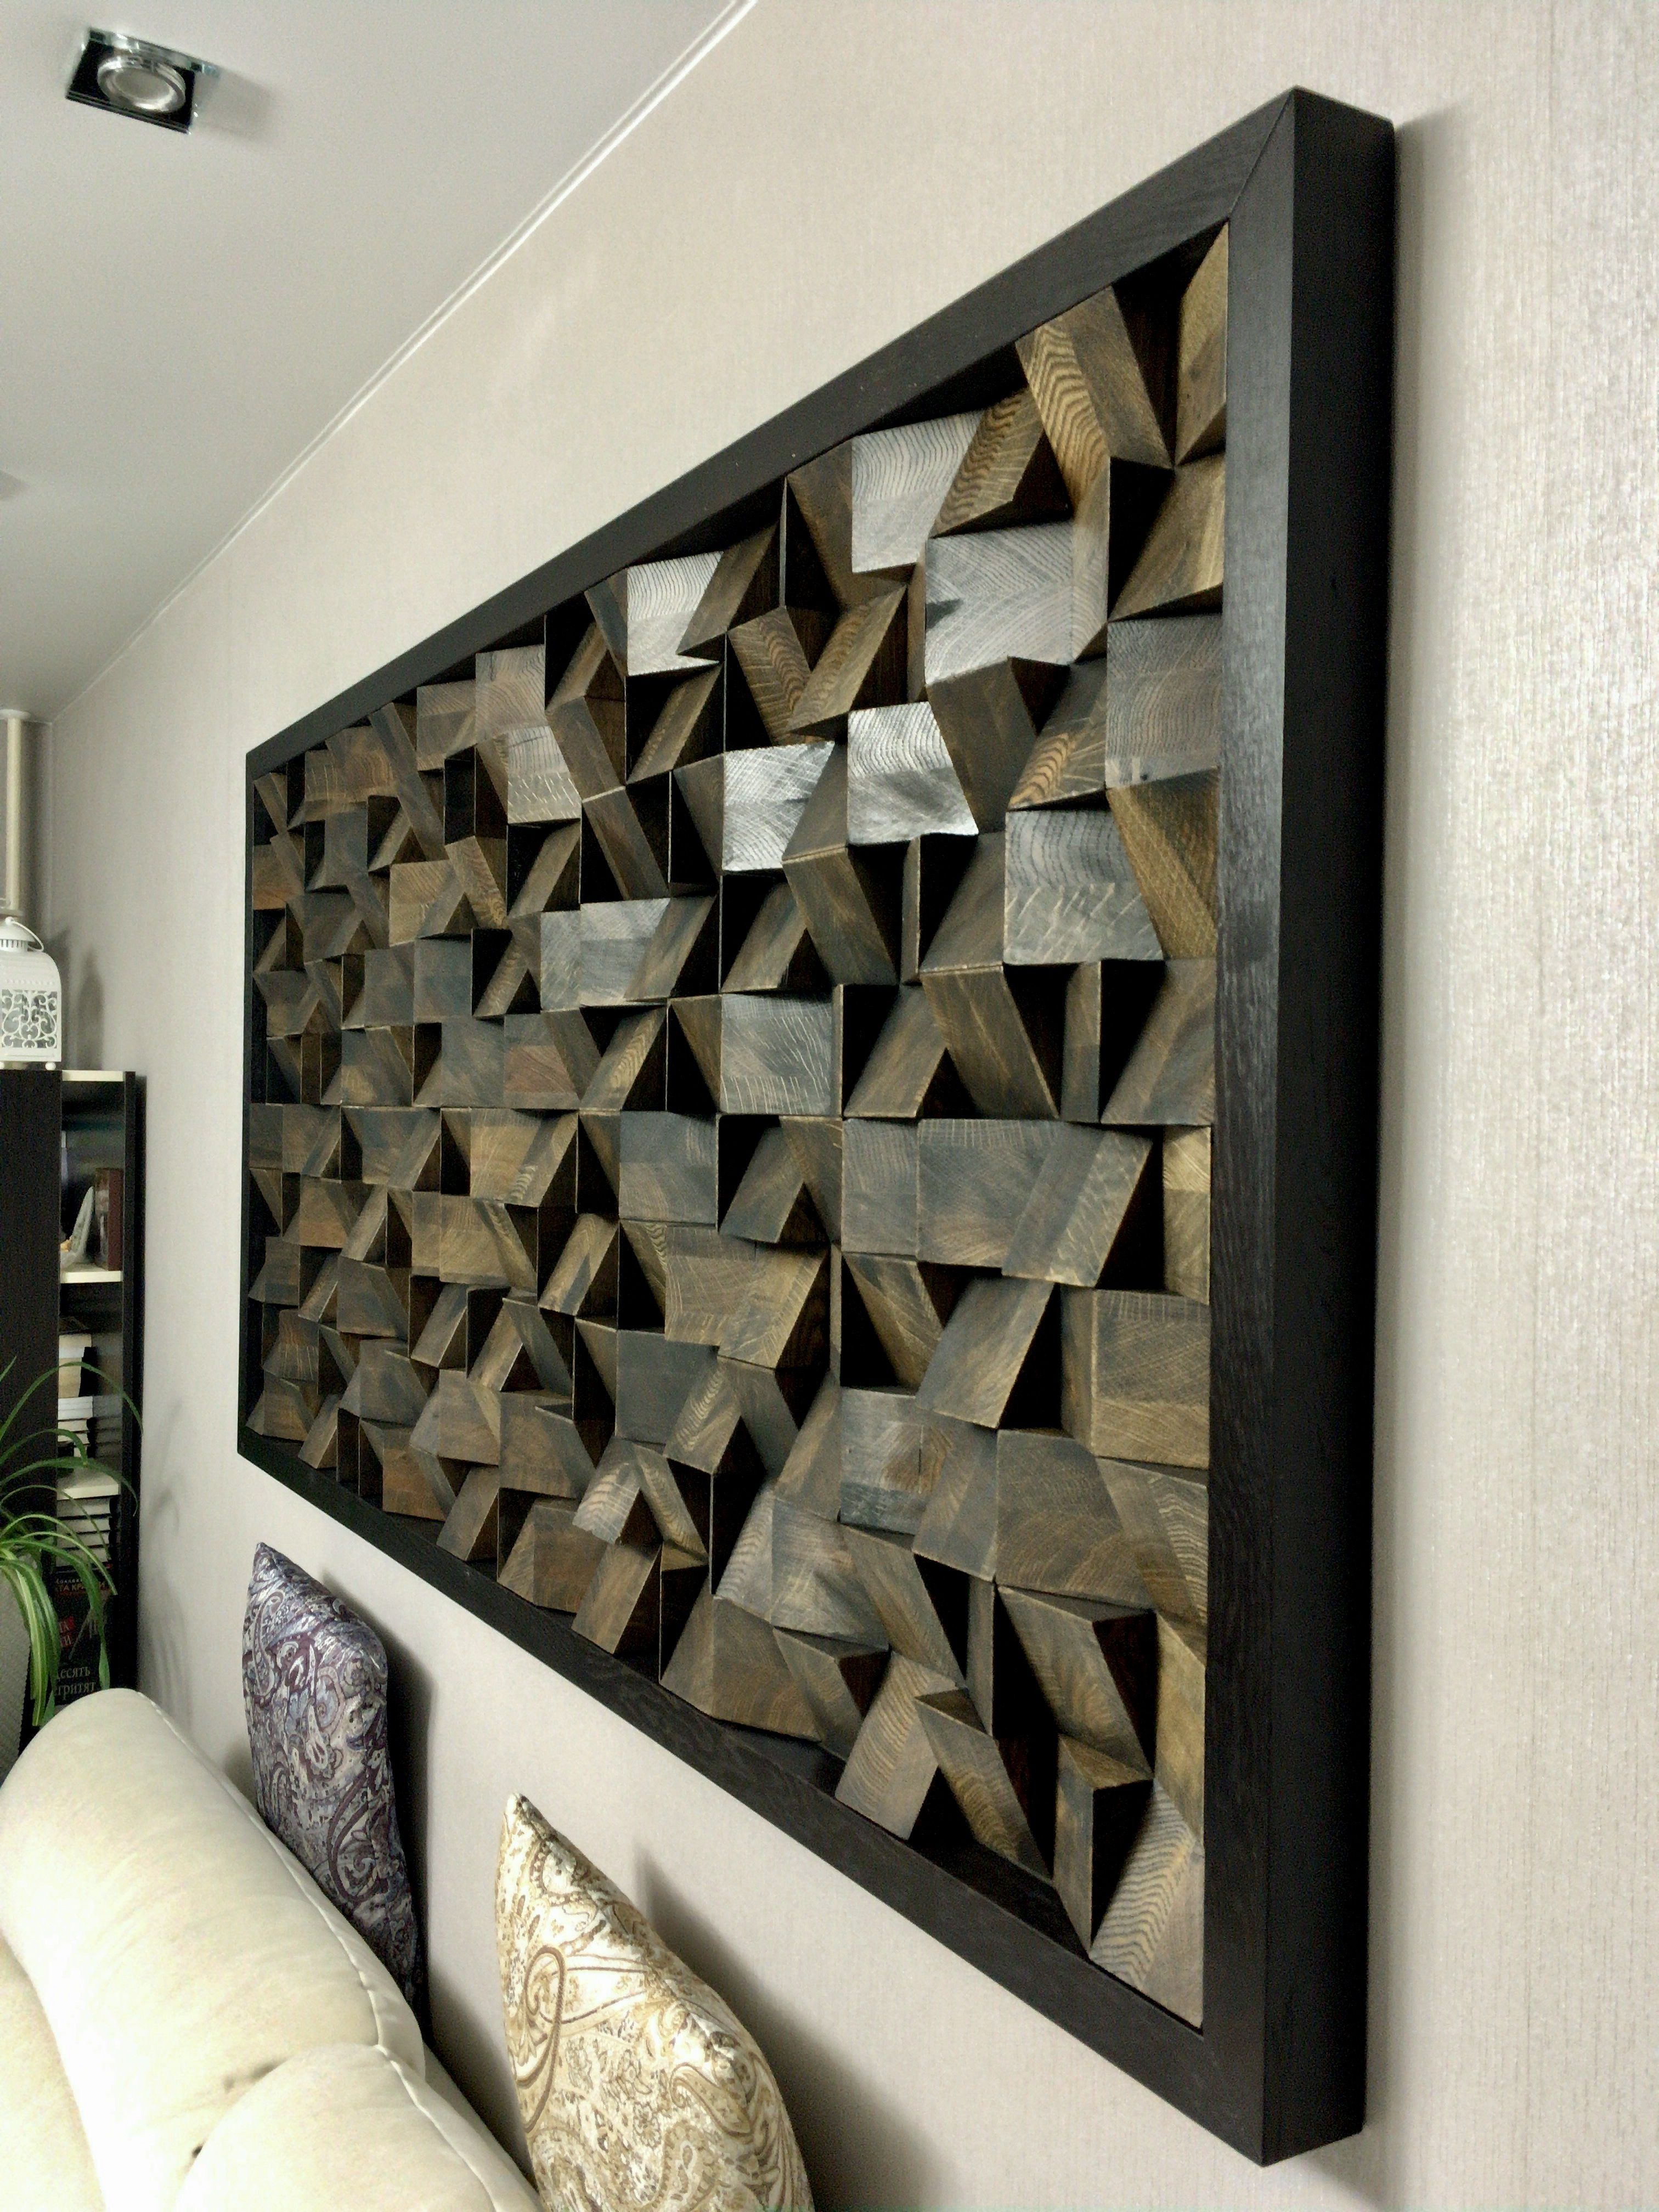 Designing For Sound: Acoustic Considerations In Home Decor